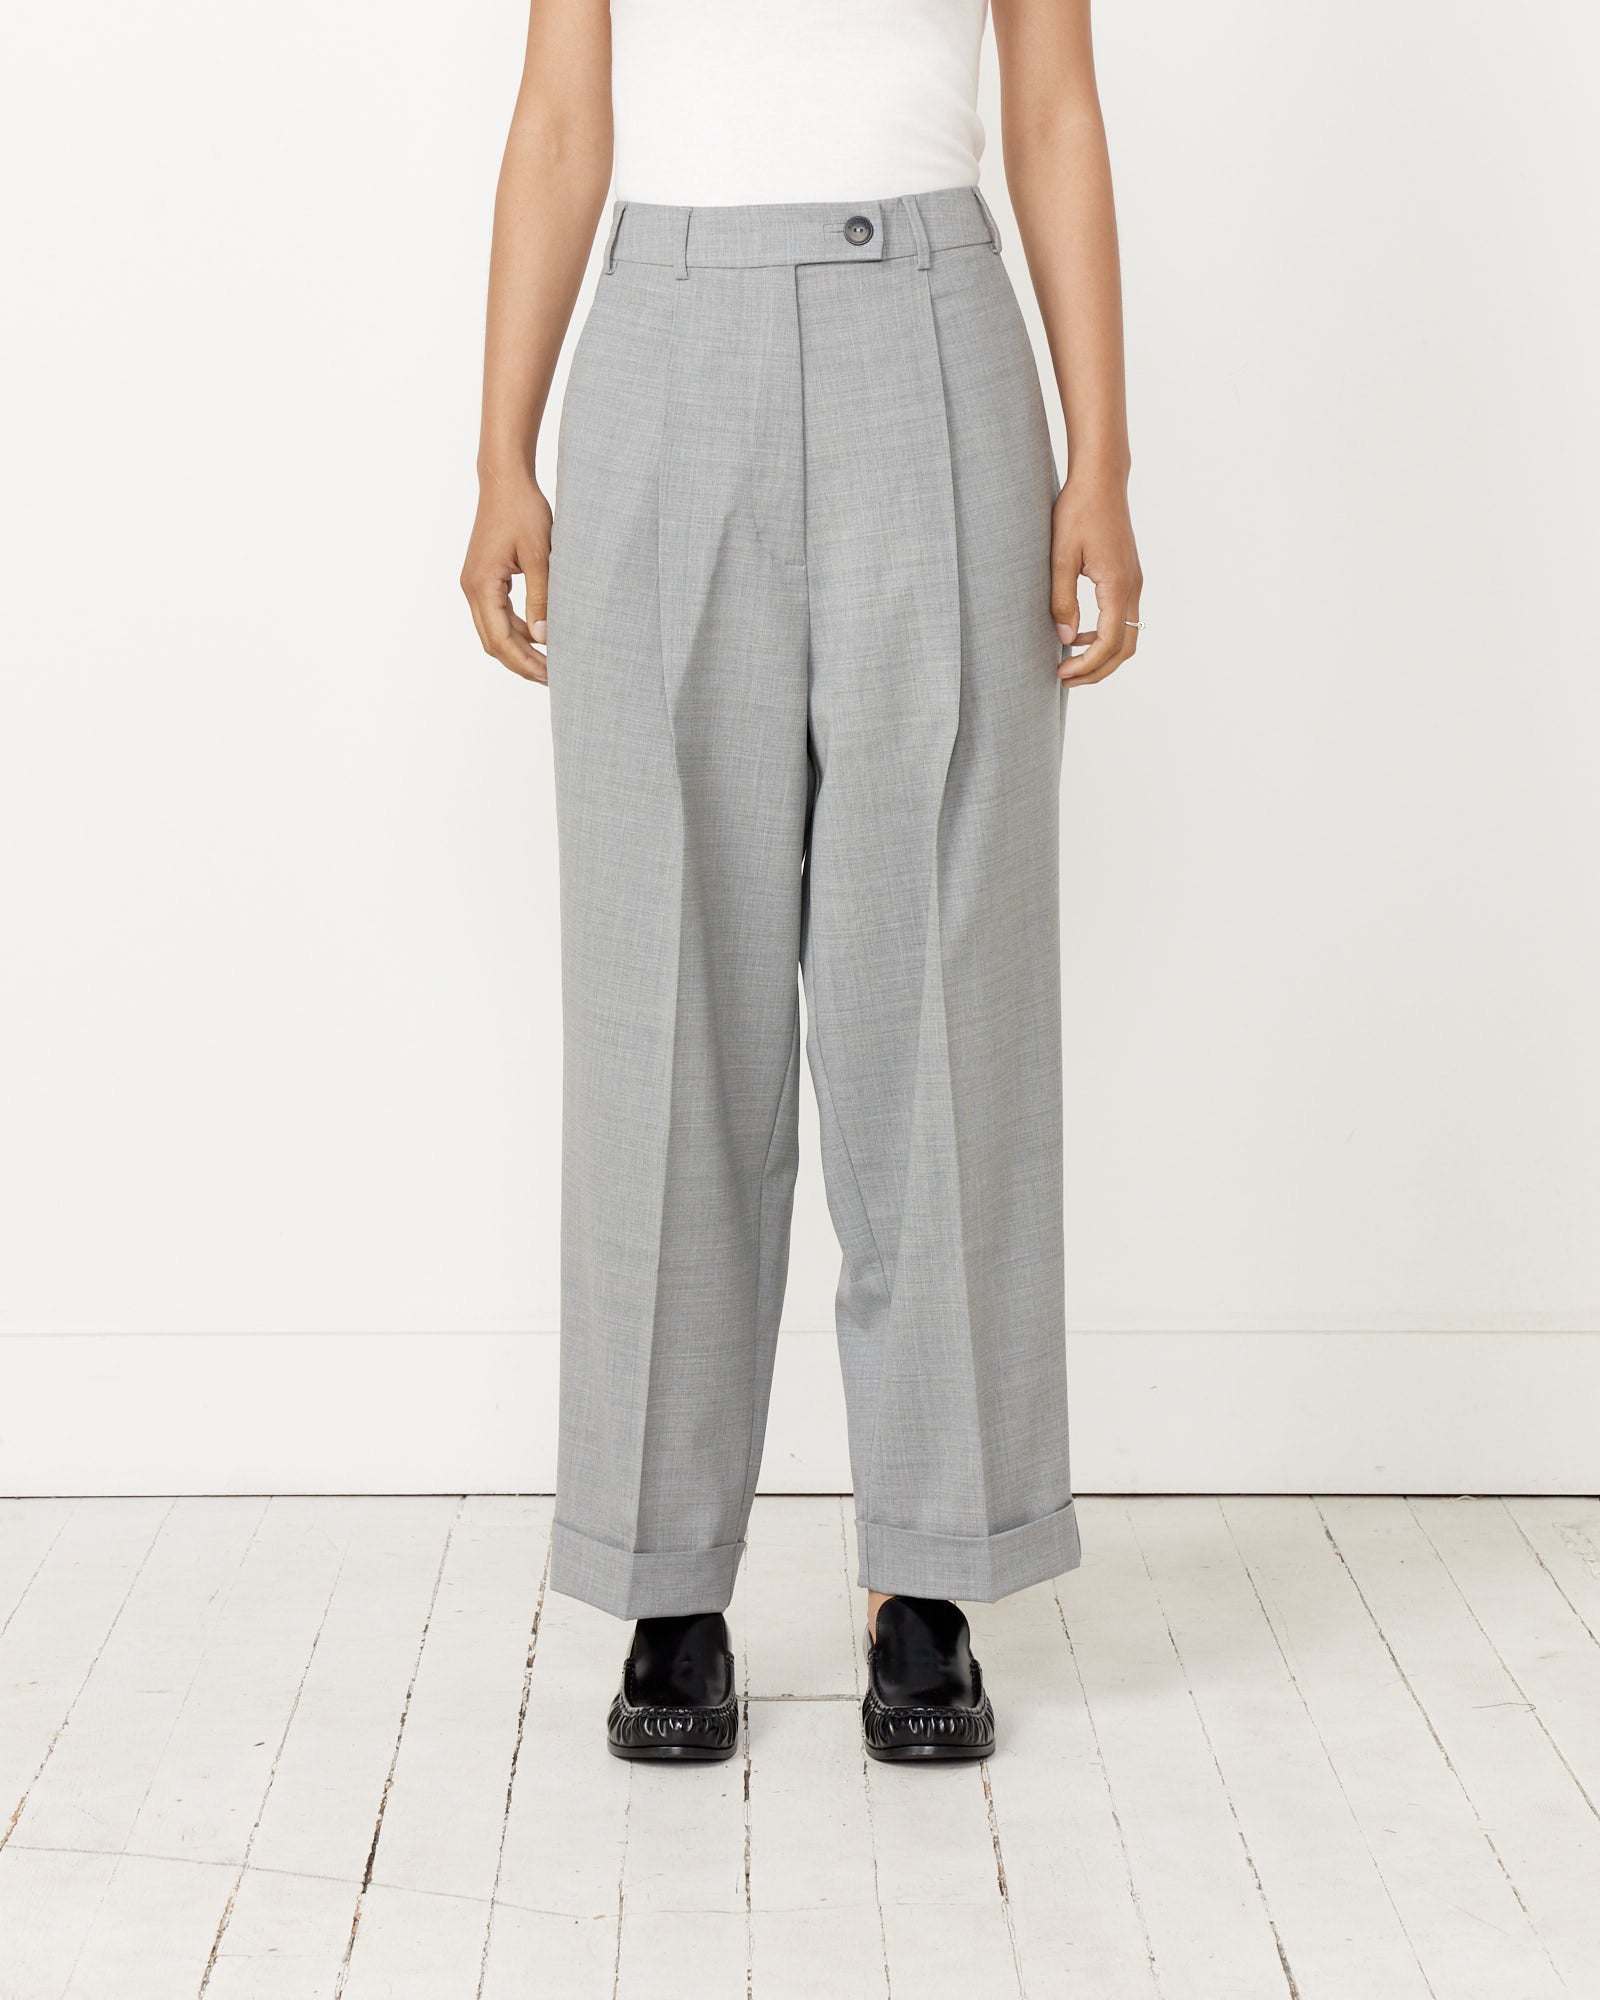 Tailoring Masculine Pant